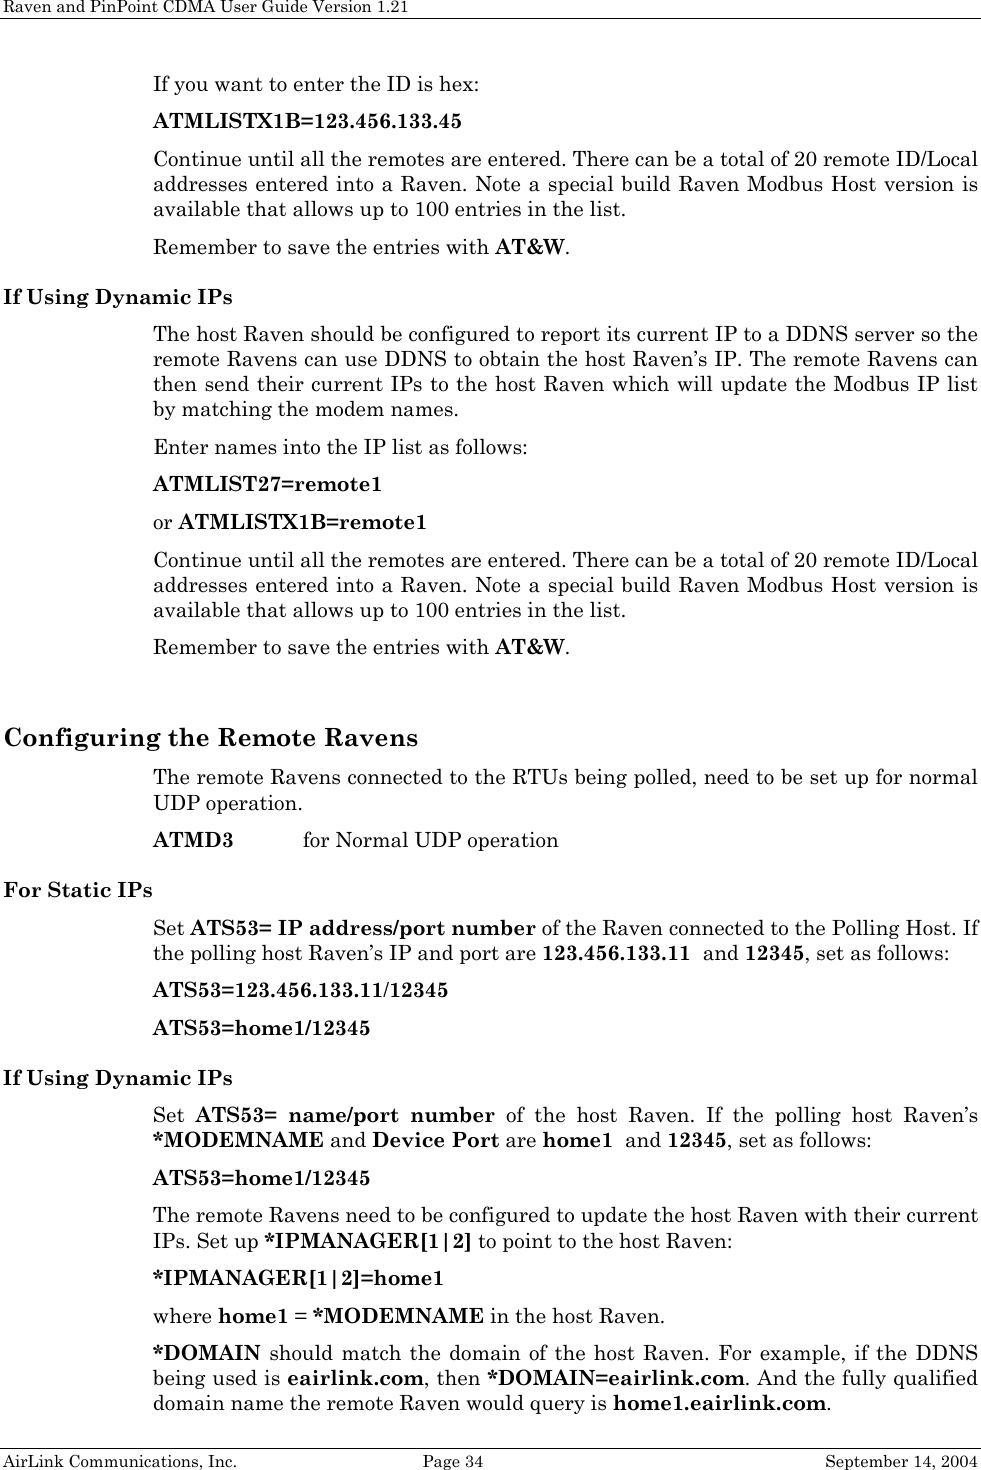 Raven and PinPoint CDMA User Guide Version 1.21 AirLink Communications, Inc.  Page 34  September 14, 2004 If you want to enter the ID is hex: ATMLISTX1B=123.456.133.45 Continue until all the remotes are entered. There can be a total of 20 remote ID/Local addresses entered into a Raven. Note a special build Raven Modbus Host version is available that allows up to 100 entries in the list. Remember to save the entries with AT&amp;W. If Using Dynamic IPs The host Raven should be configured to report its current IP to a DDNS server so the remote Ravens can use DDNS to obtain the host Raven’s IP. The remote Ravens can then send their current IPs to the host Raven which will update the Modbus IP list by matching the modem names. Enter names into the IP list as follows: ATMLIST27=remote1 or ATMLISTX1B=remote1 Continue until all the remotes are entered. There can be a total of 20 remote ID/Local addresses entered into a Raven. Note a special build Raven Modbus Host version is available that allows up to 100 entries in the list. Remember to save the entries with AT&amp;W.  Configuring the Remote Ravens The remote Ravens connected to the RTUs being polled, need to be set up for normal UDP operation.  ATMD3  for Normal UDP operation For Static IPs Set ATS53= IP address/port number of the Raven connected to the Polling Host. If the polling host Raven’s IP and port are 123.456.133.11  and 12345, set as follows: ATS53=123.456.133.11/12345 ATS53=home1/12345 If Using Dynamic IPs Set  ATS53= name/port number of the host Raven. If the polling host Raven’s *MODEMNAME and Device Port are home1  and 12345, set as follows: ATS53=home1/12345 The remote Ravens need to be configured to update the host Raven with their current IPs. Set up *IPMANAGER[1|2] to point to the host Raven: *IPMANAGER[1|2]=home1 where home1 = *MODEMNAME in the host Raven. *DOMAIN should match the domain of the host Raven. For example, if the DDNS being used is eairlink.com, then *DOMAIN=eairlink.com. And the fully qualified domain name the remote Raven would query is home1.eairlink.com. 